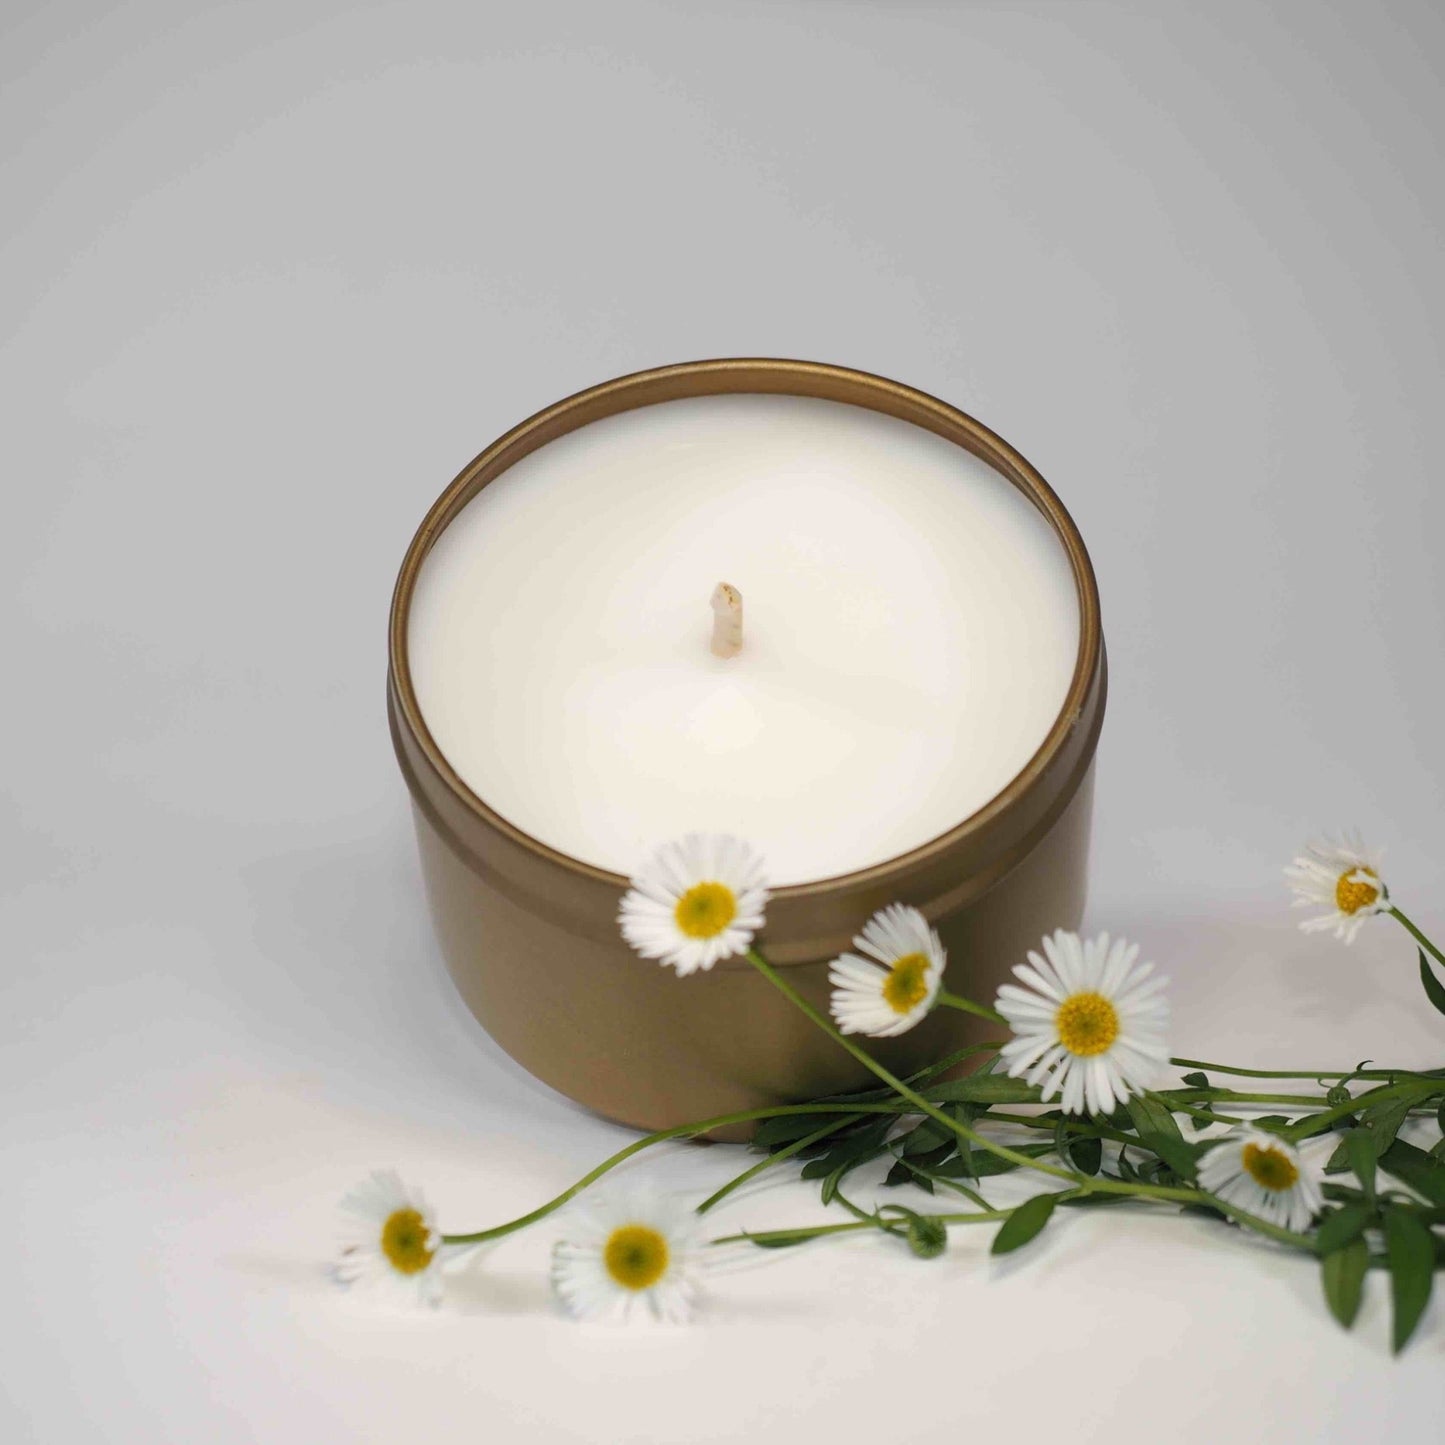 Australian gold travel tin candle open with daisies